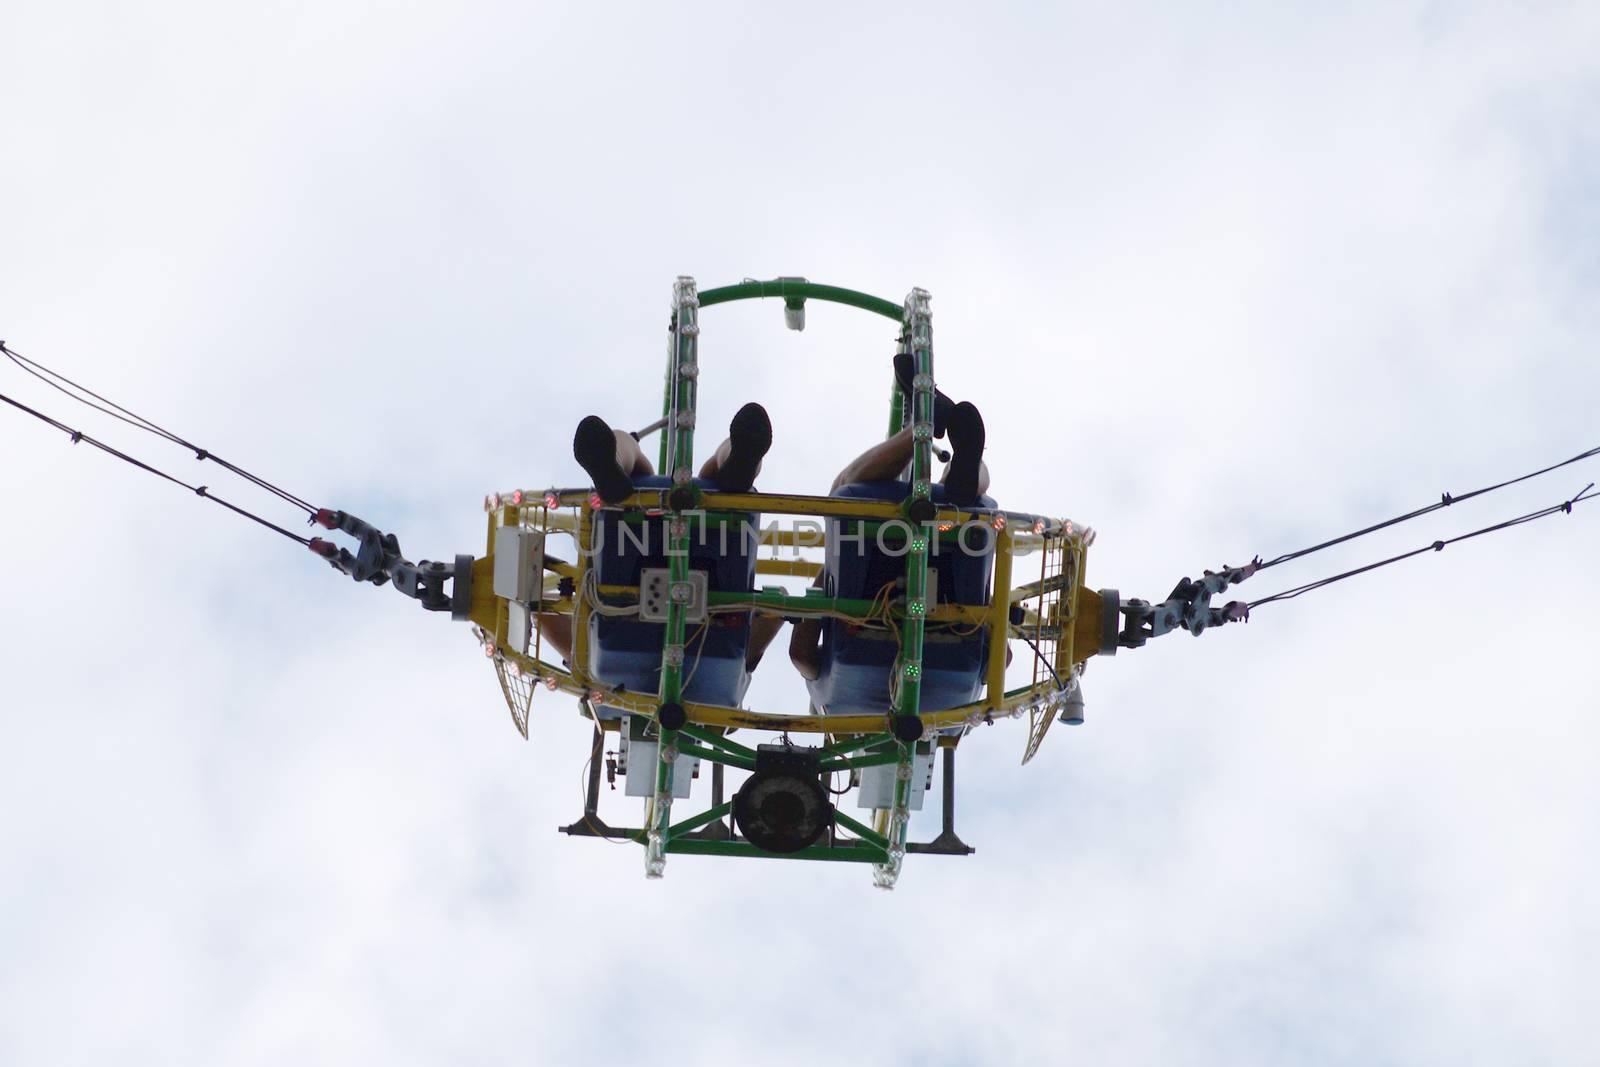 Varna, Bulgaria - June, 26, 2020: two people on the bungee ride bottom view.